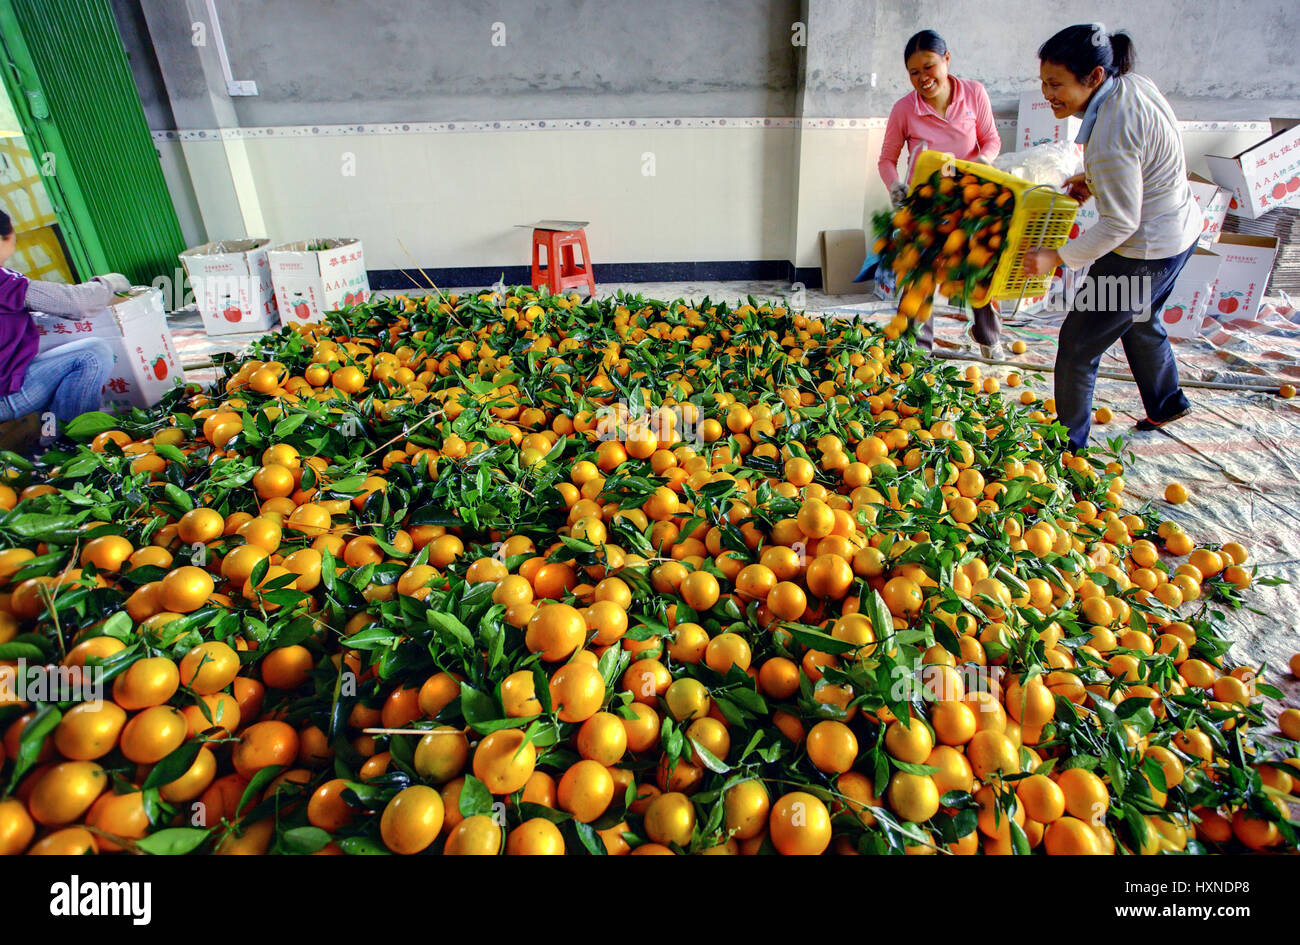 YANGSHUO, GUANGXI, CHINA - MARCH 31: Processing of Chinese oranges spring harvest, March 31, 2010. Chinese women unloaded oranges from a plastic box i Stock Photo